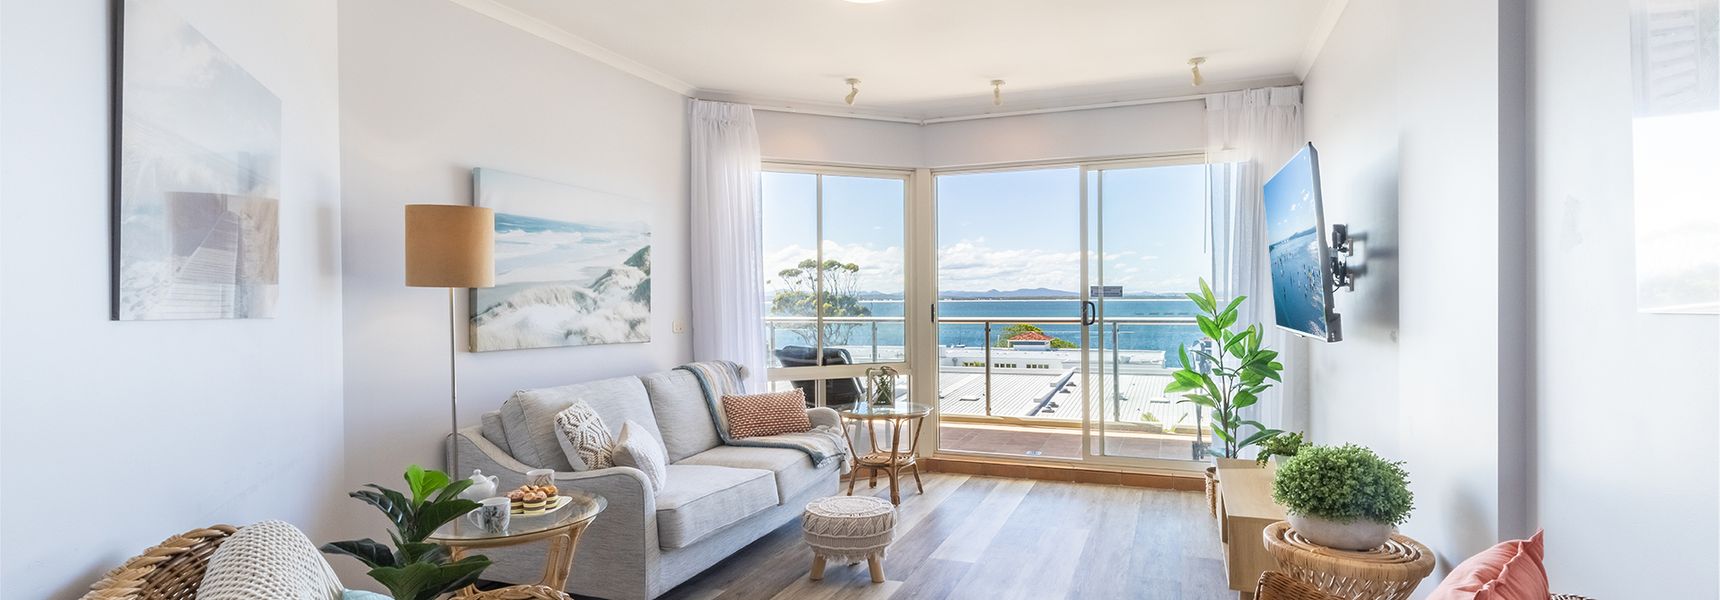 203 The Breakwater, 2 Messines St – magical unit with lift, pool, views and aircon